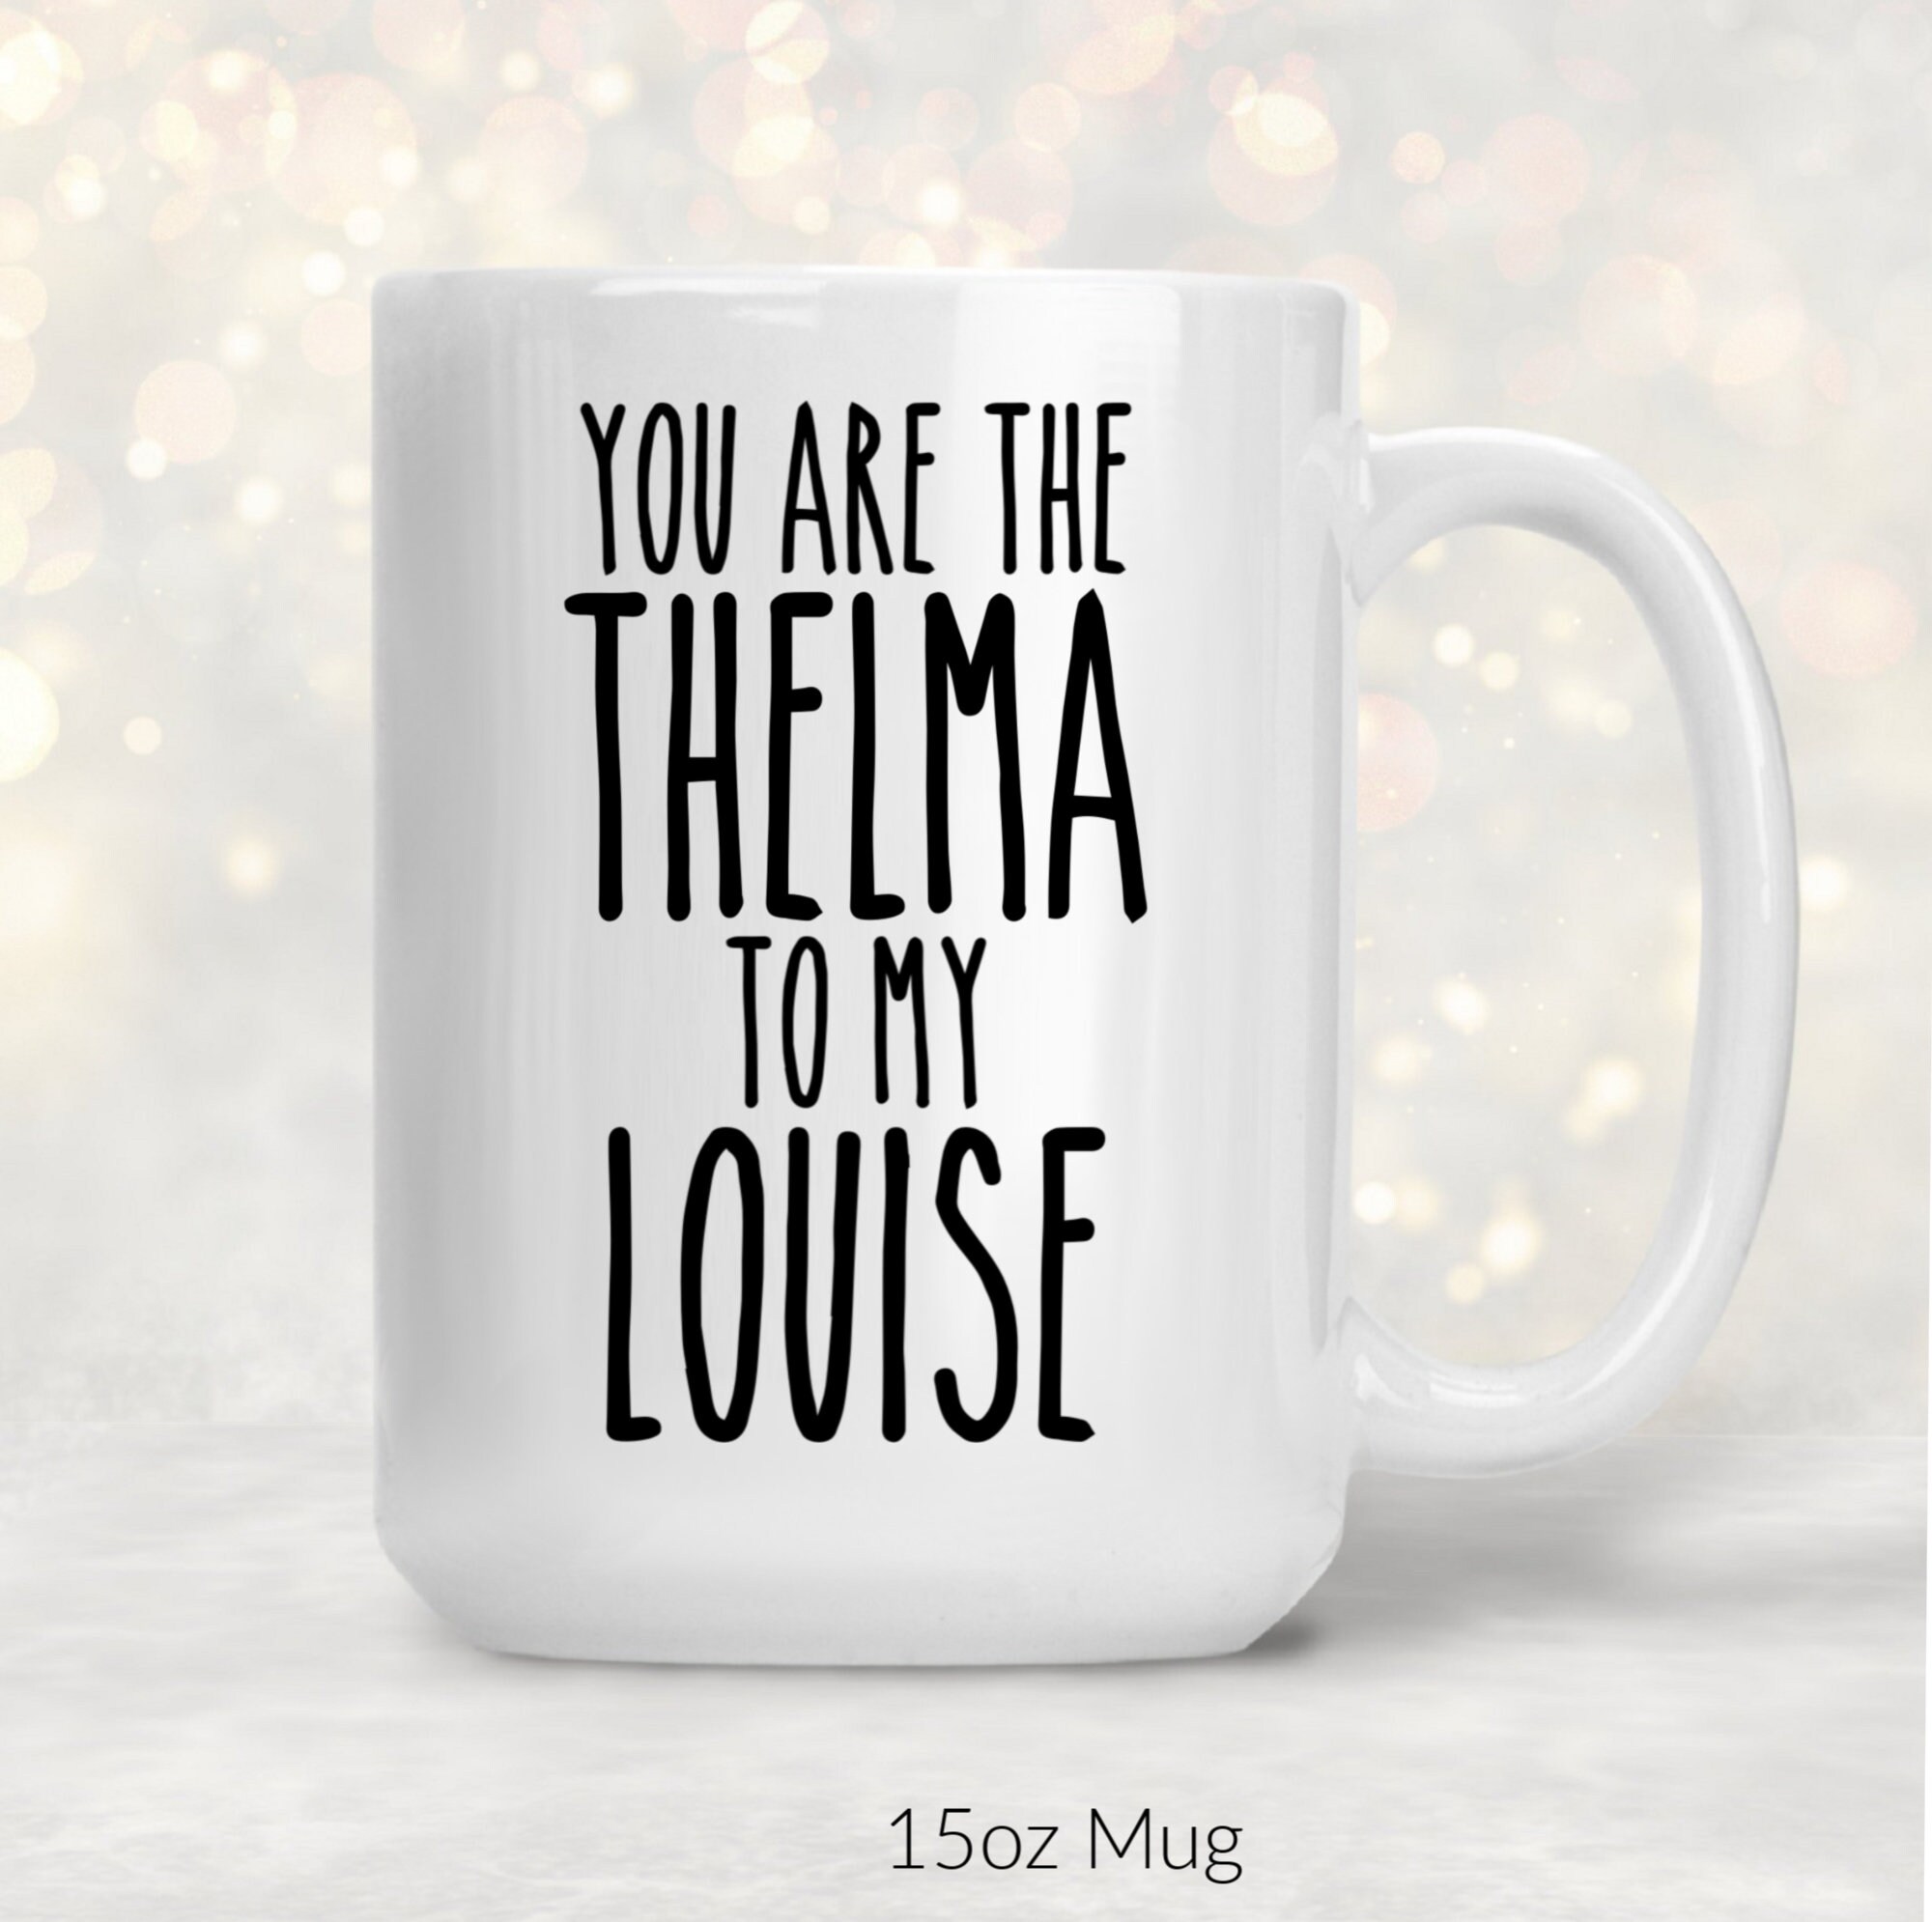 You're the Louise to my Thelma coffee mug, best friend gift